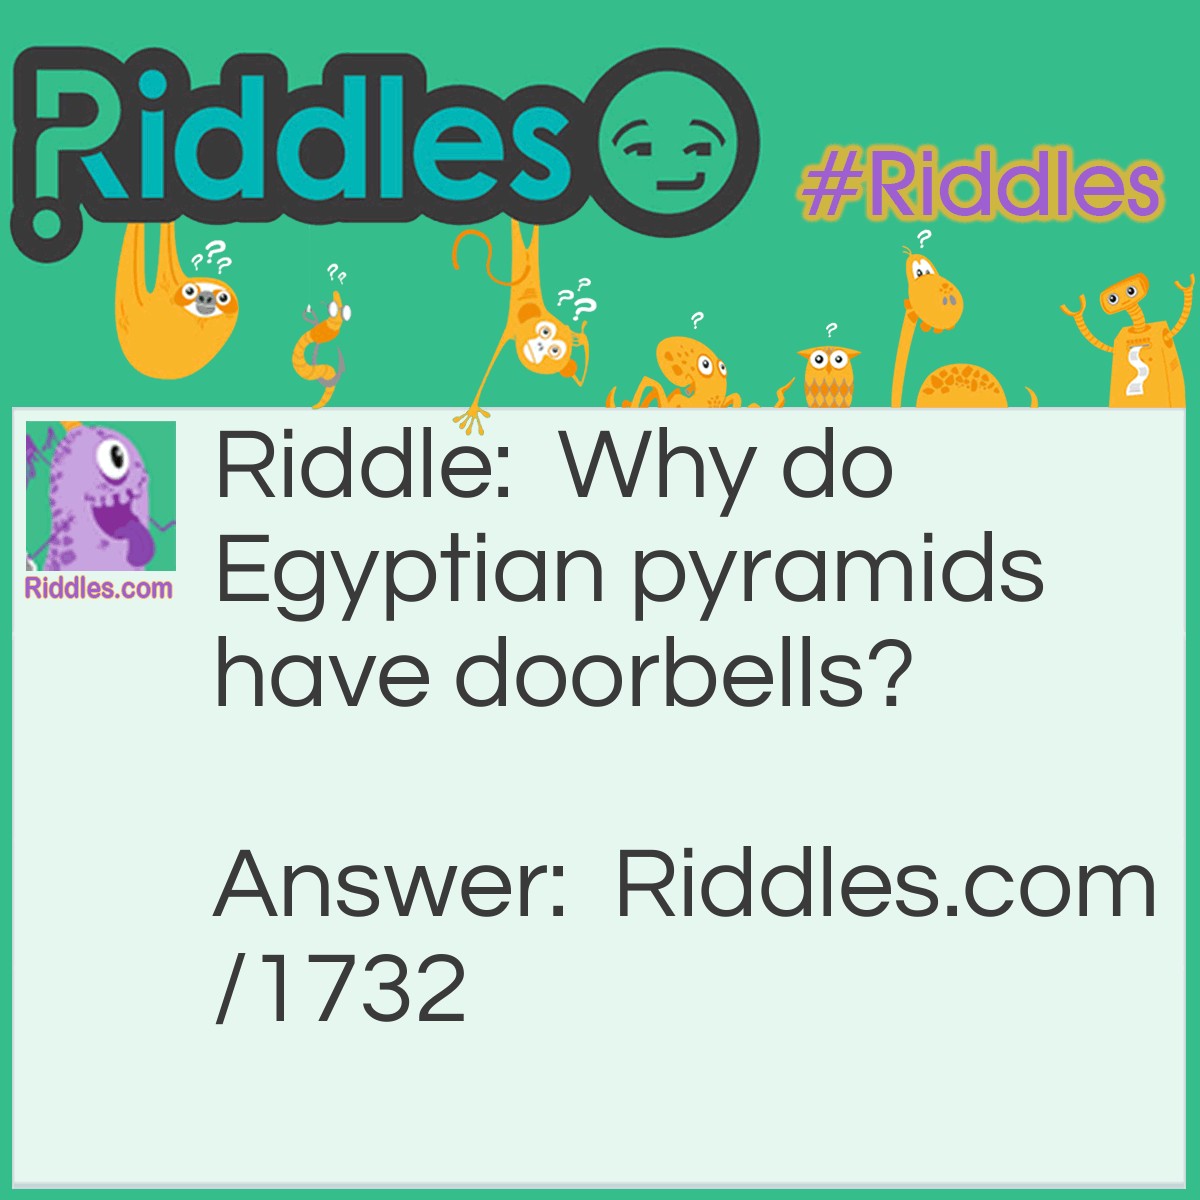 Riddle: Why do Egyptian pyramids have doorbells? Answer: So you toot-'n'-come-in.